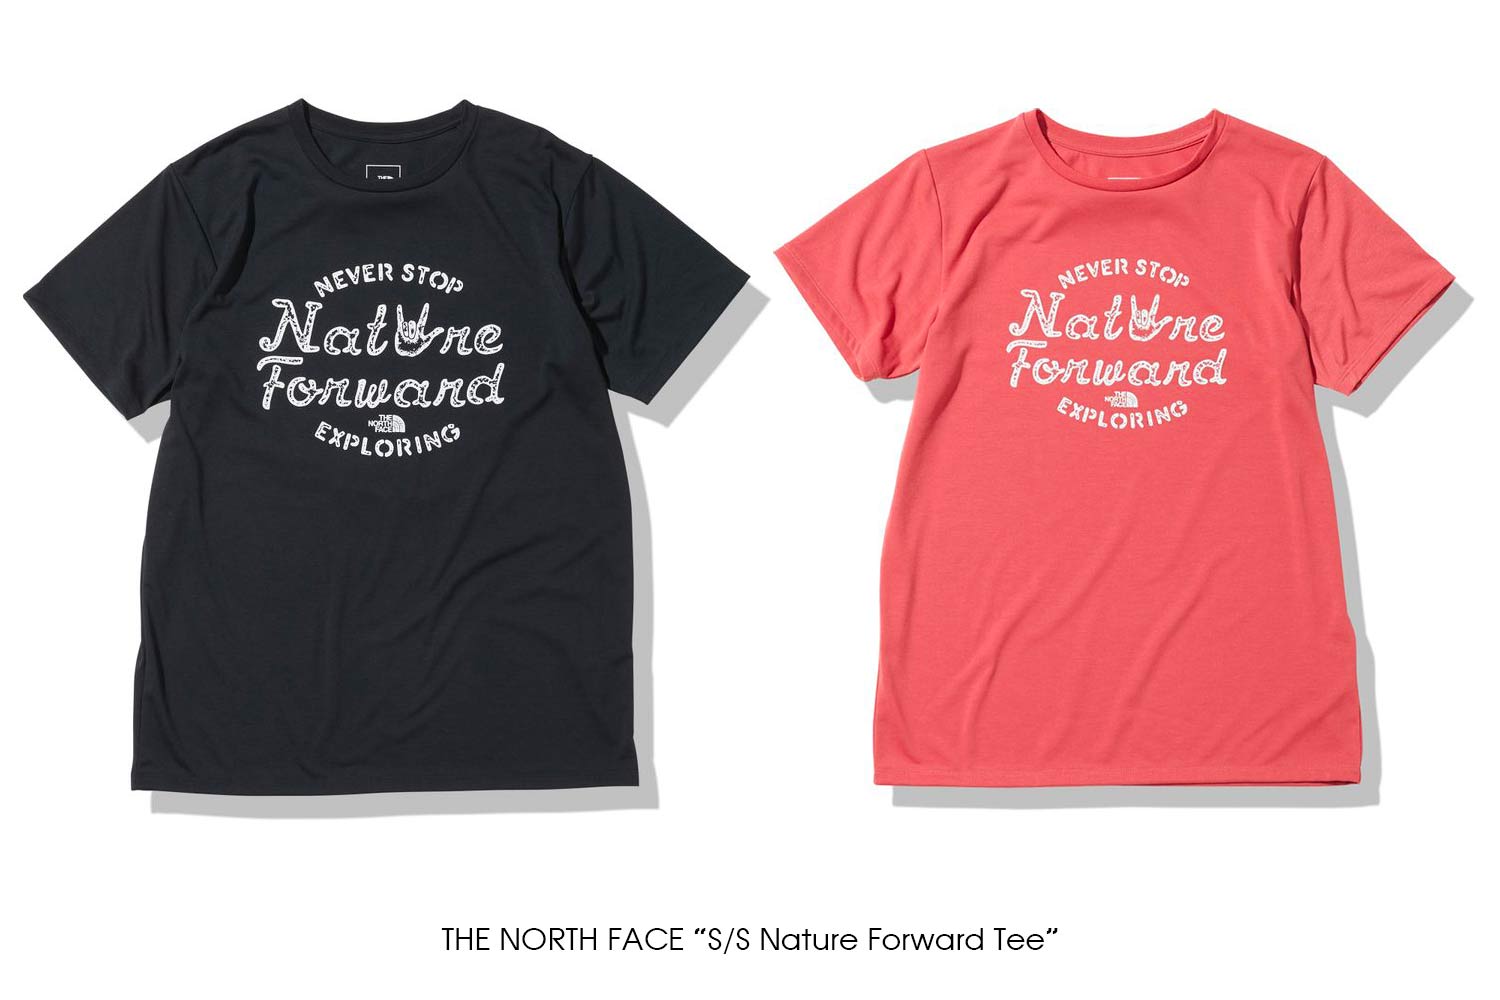 THE NORTH FACE "S/S Nature Forward Tee"